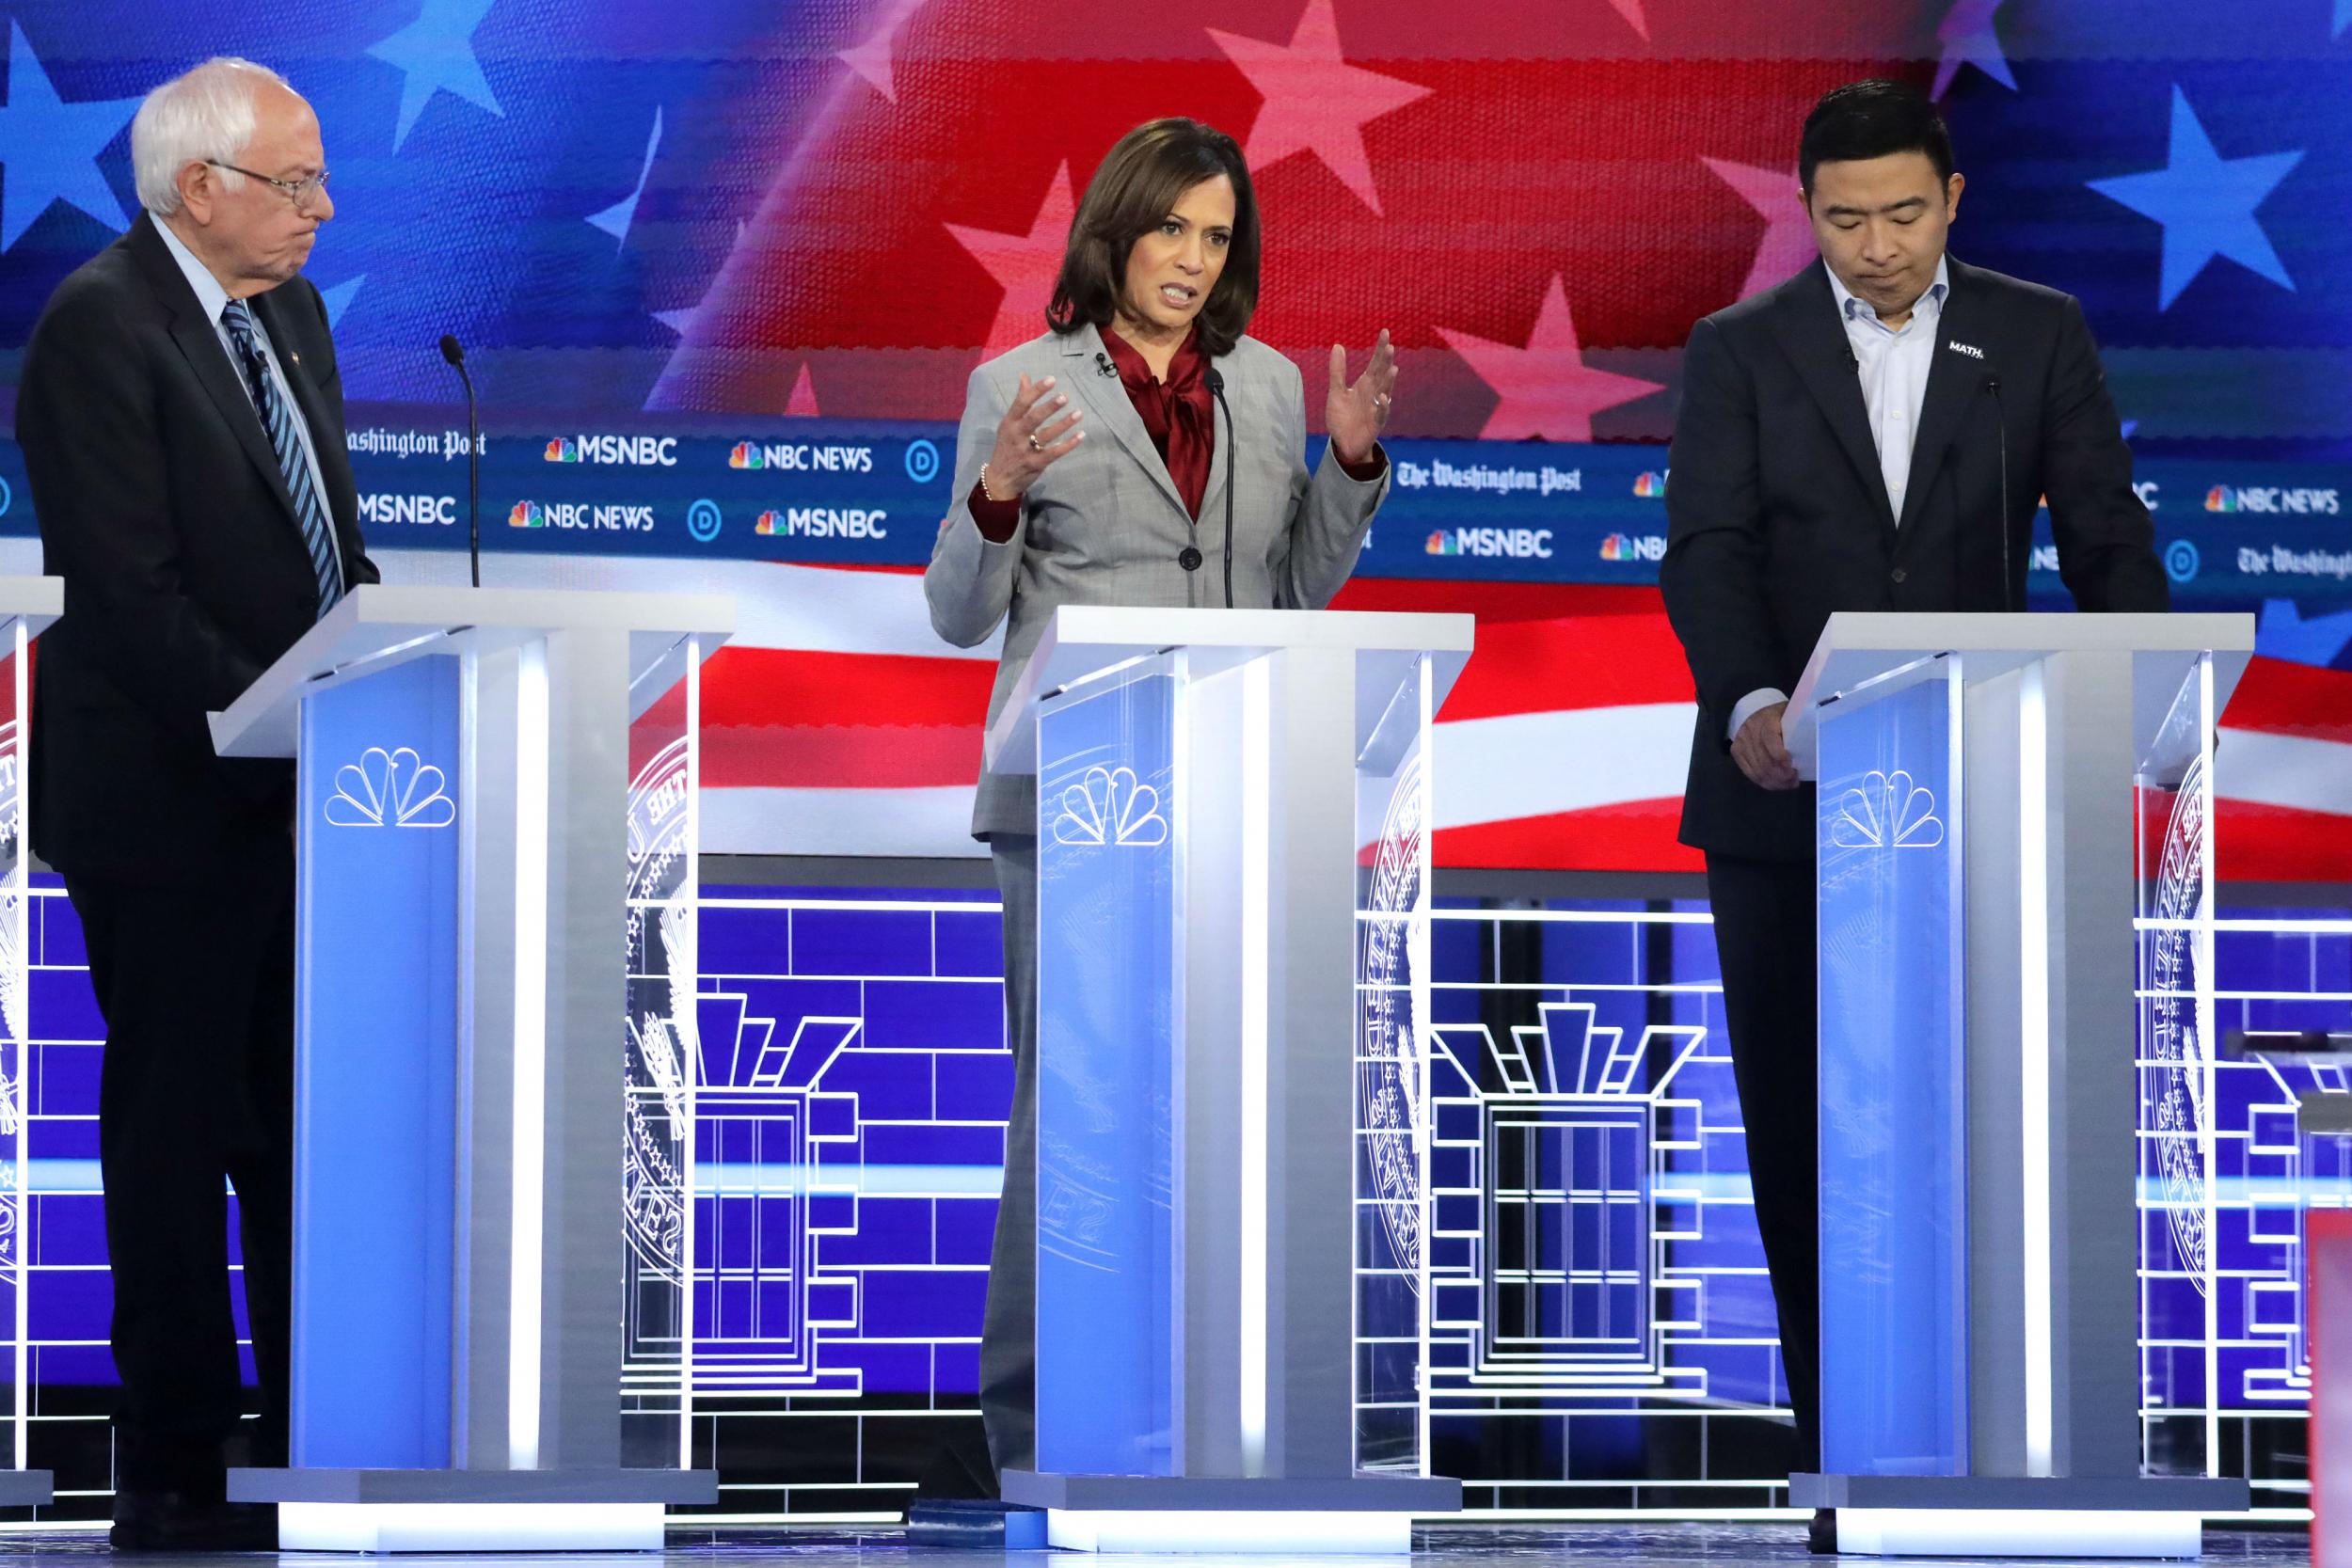 In last night's debate, Booker and Harris took on Democratic virtue-signaling — while Trump supporters came out for Gabbard